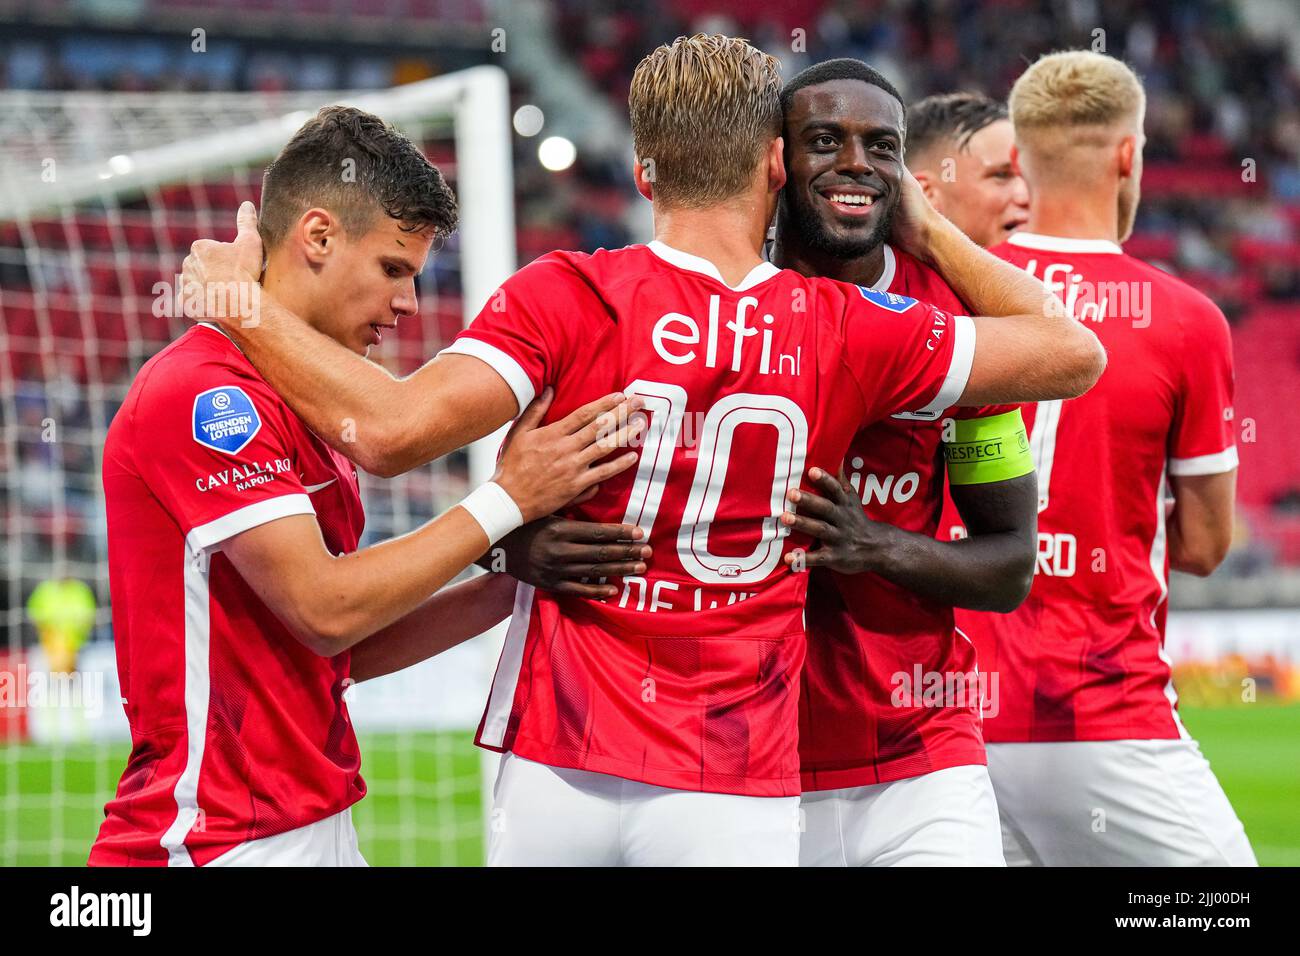 ALKMAAR - Dani de Wit of AZ Alkmaar celebrates the 1-0 during the second heat of the Conference League match between AZ and FK Tuzla City at the AFAS stadium on July 21, 2022 in Alkmaar, Netherlands. ANP ED OF THE POL Stock Photo